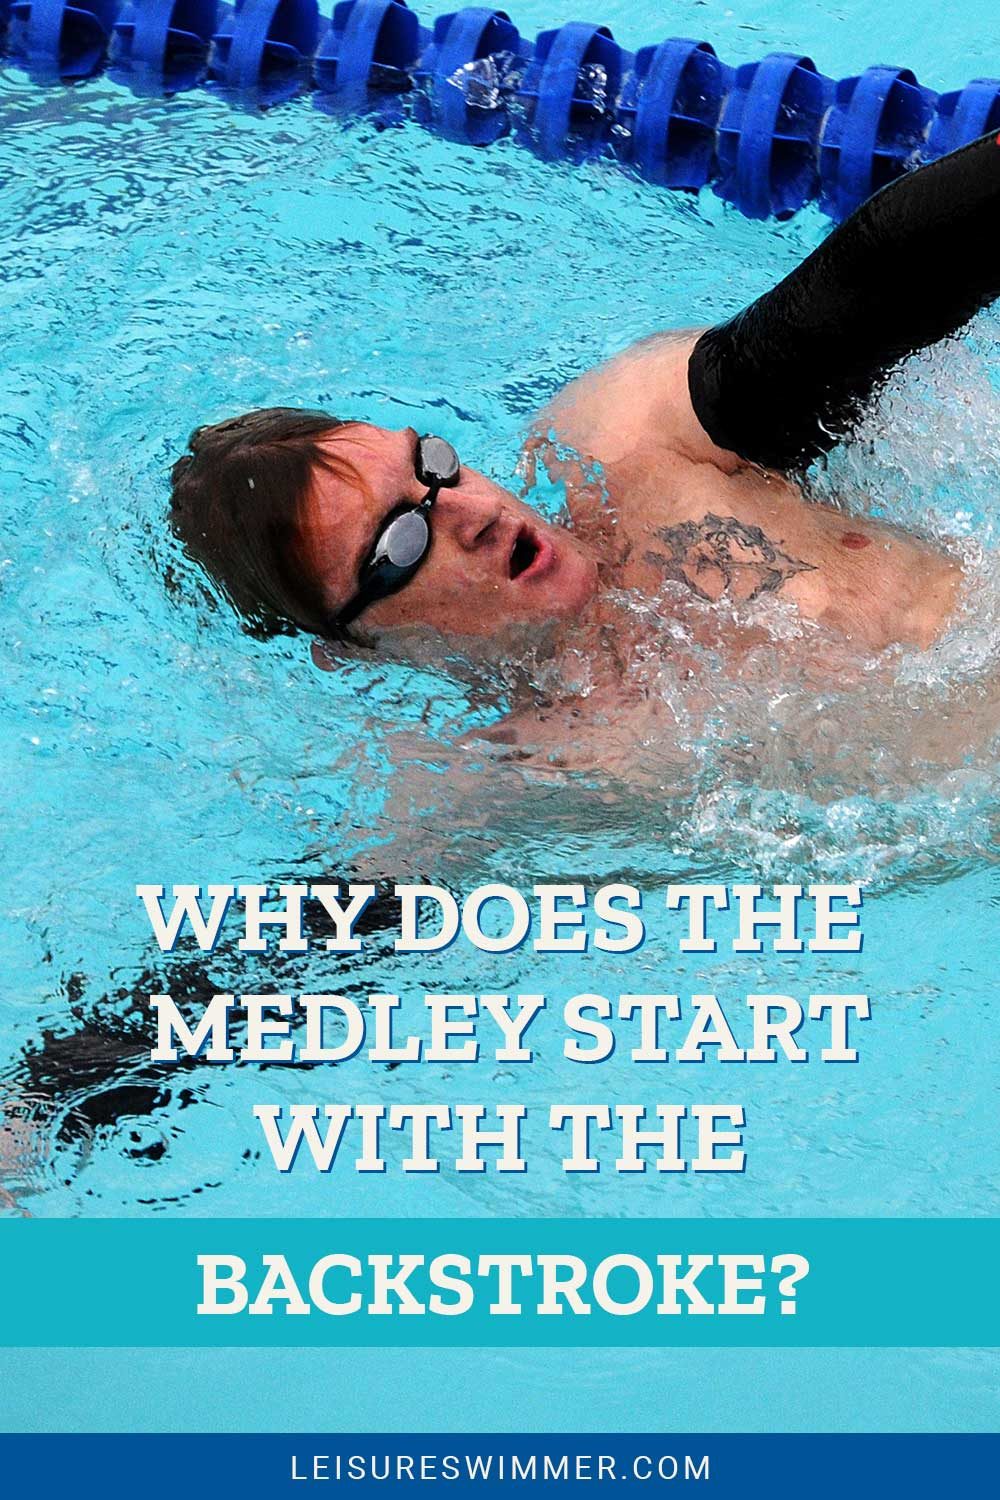 Man doing backstrokes in a pool - Why Does The Medley Start With The Backstroke?